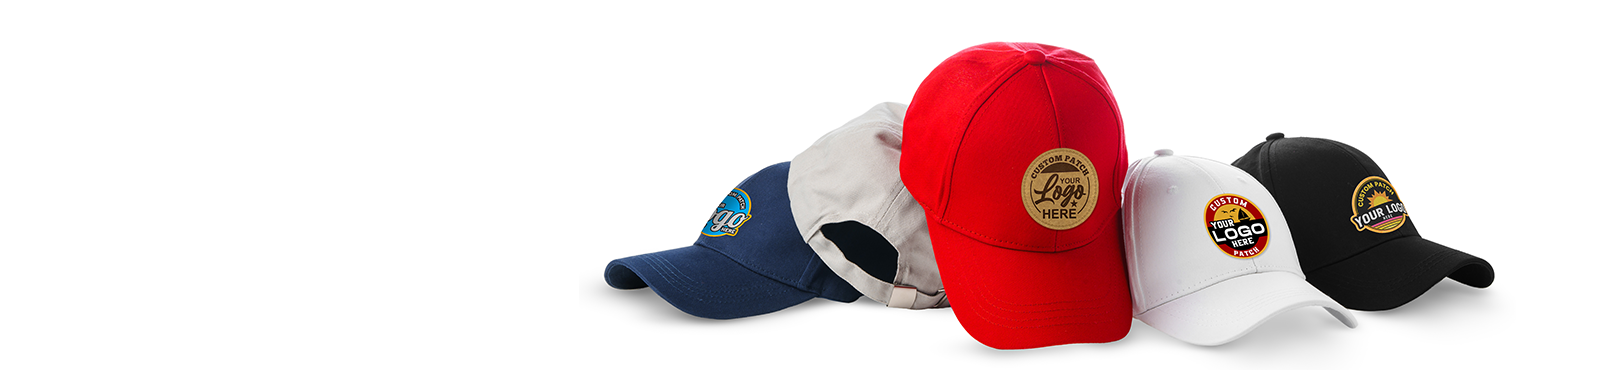 Five baseball caps in a row, each with a different colored front and a mockup patch for custom logos, on a white background.